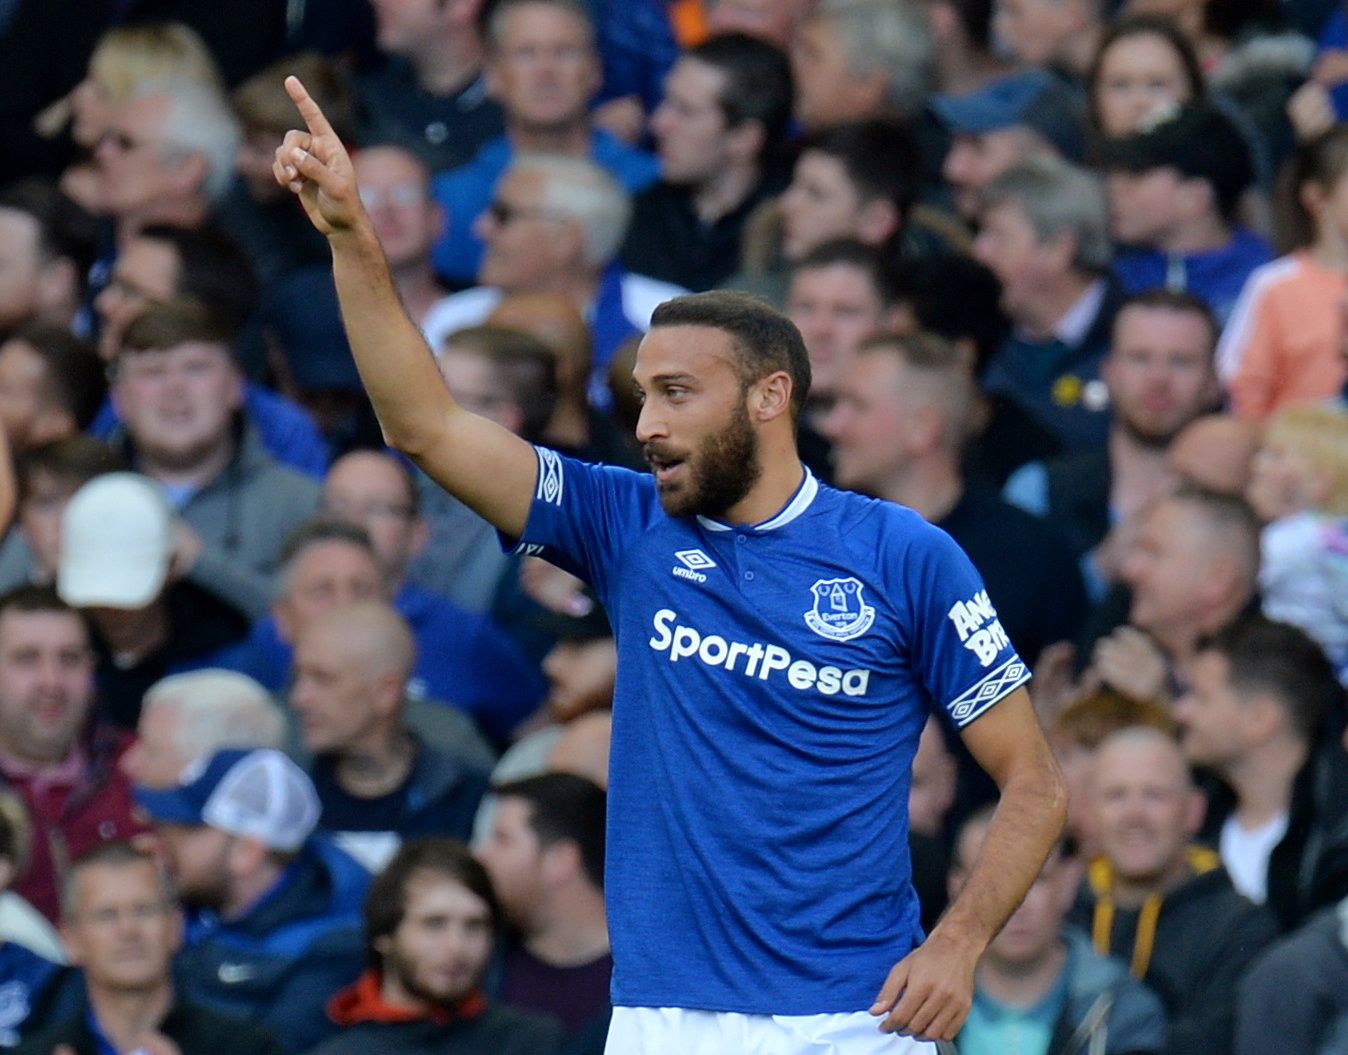 Soccer Football - Premier League - Everton v Fulham - Goodison Park, Liverpool, Britain - September 29, 2018 Everton's Cenk Tosun celebrates scoring their second goal  REUTERS/Peter Powell  EDITORIAL USE ONLY. No use with unauthorized audio, video, data, fixture lists, club/league logos or 